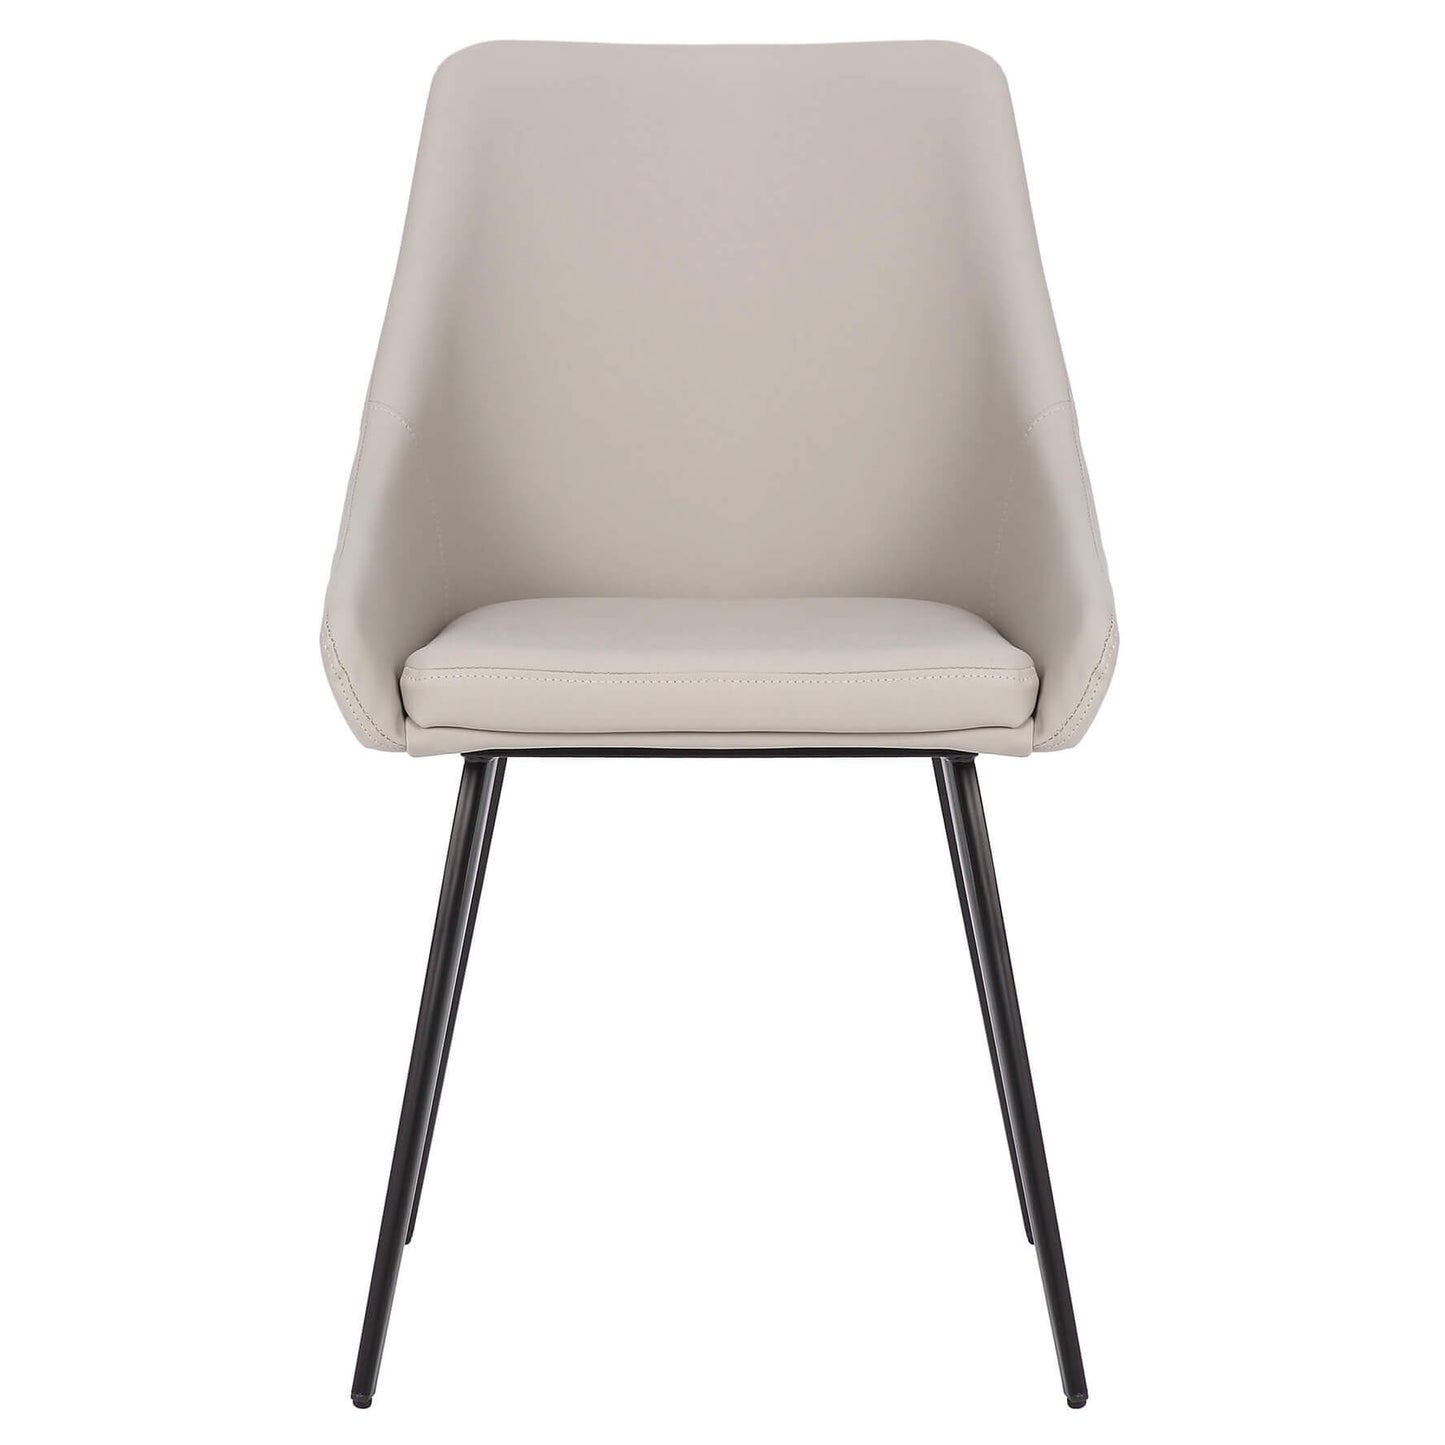 Chesterton | Modern PU Leather Dining Chairs | Set Of 2 | Light Grey